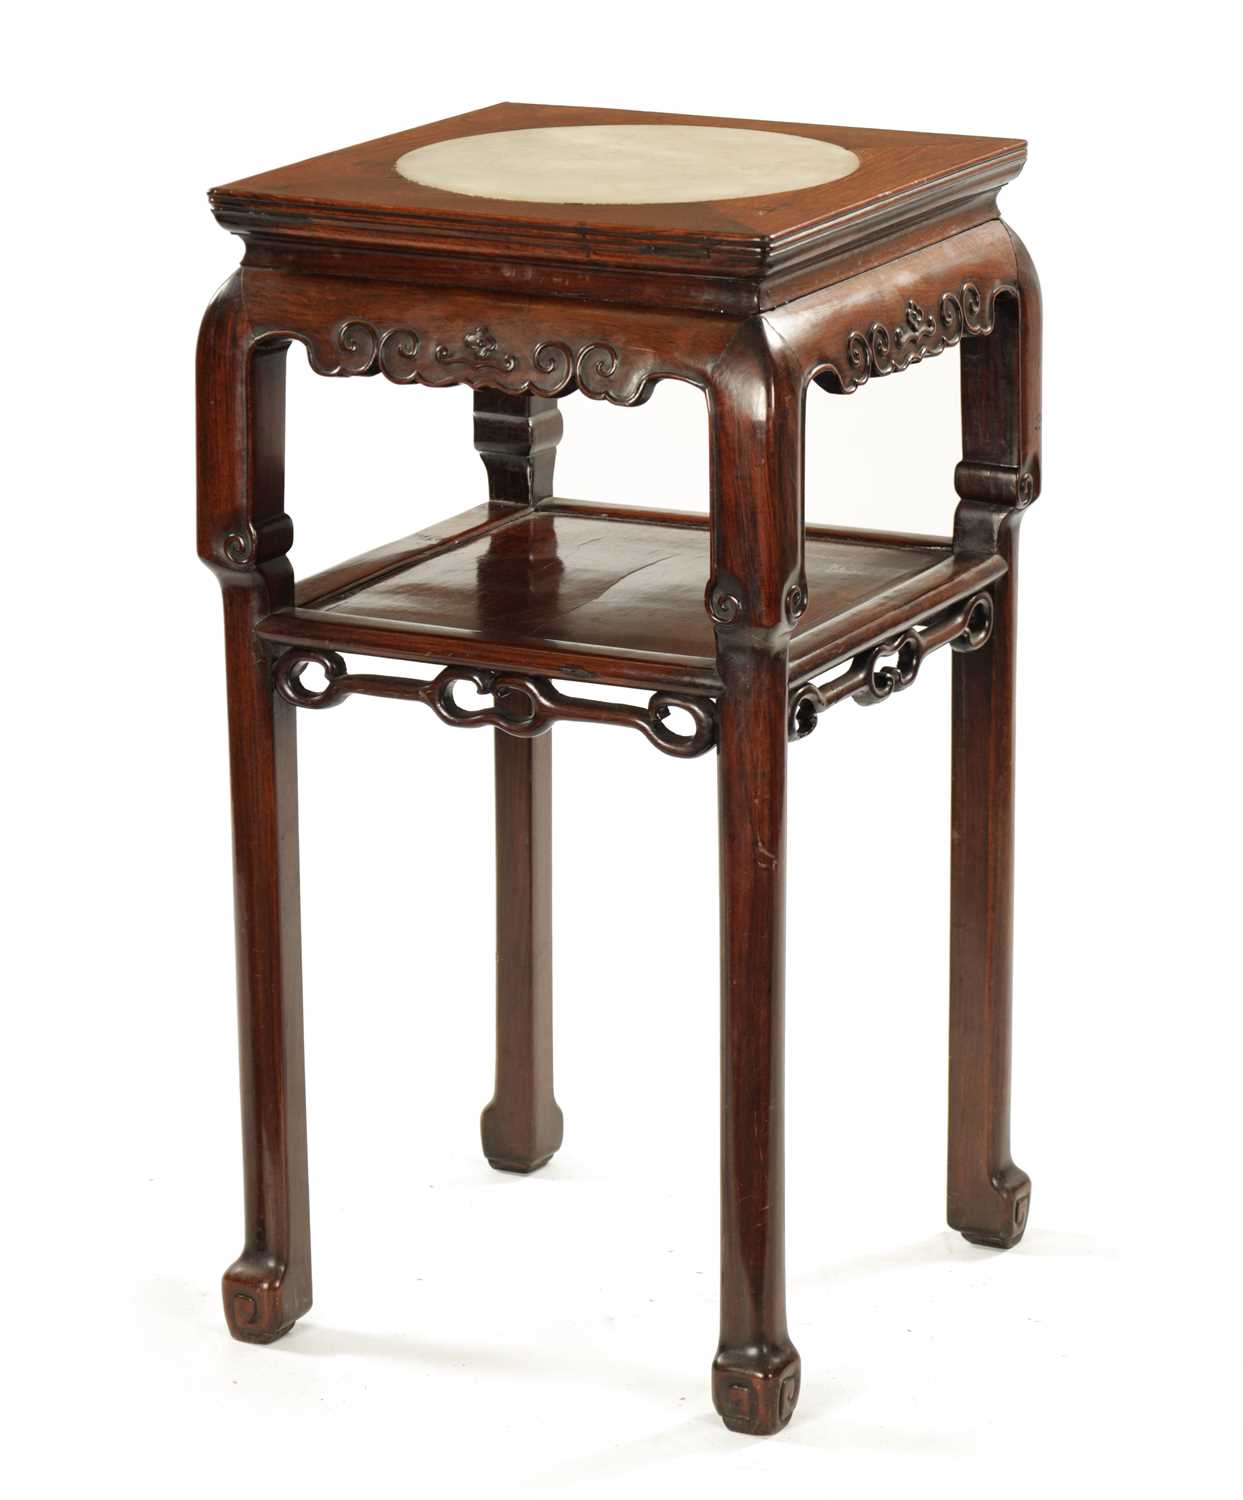 Lot 215 - A 19TH CENTURY CHINESE HARDWOOD JARDINIERE STAND